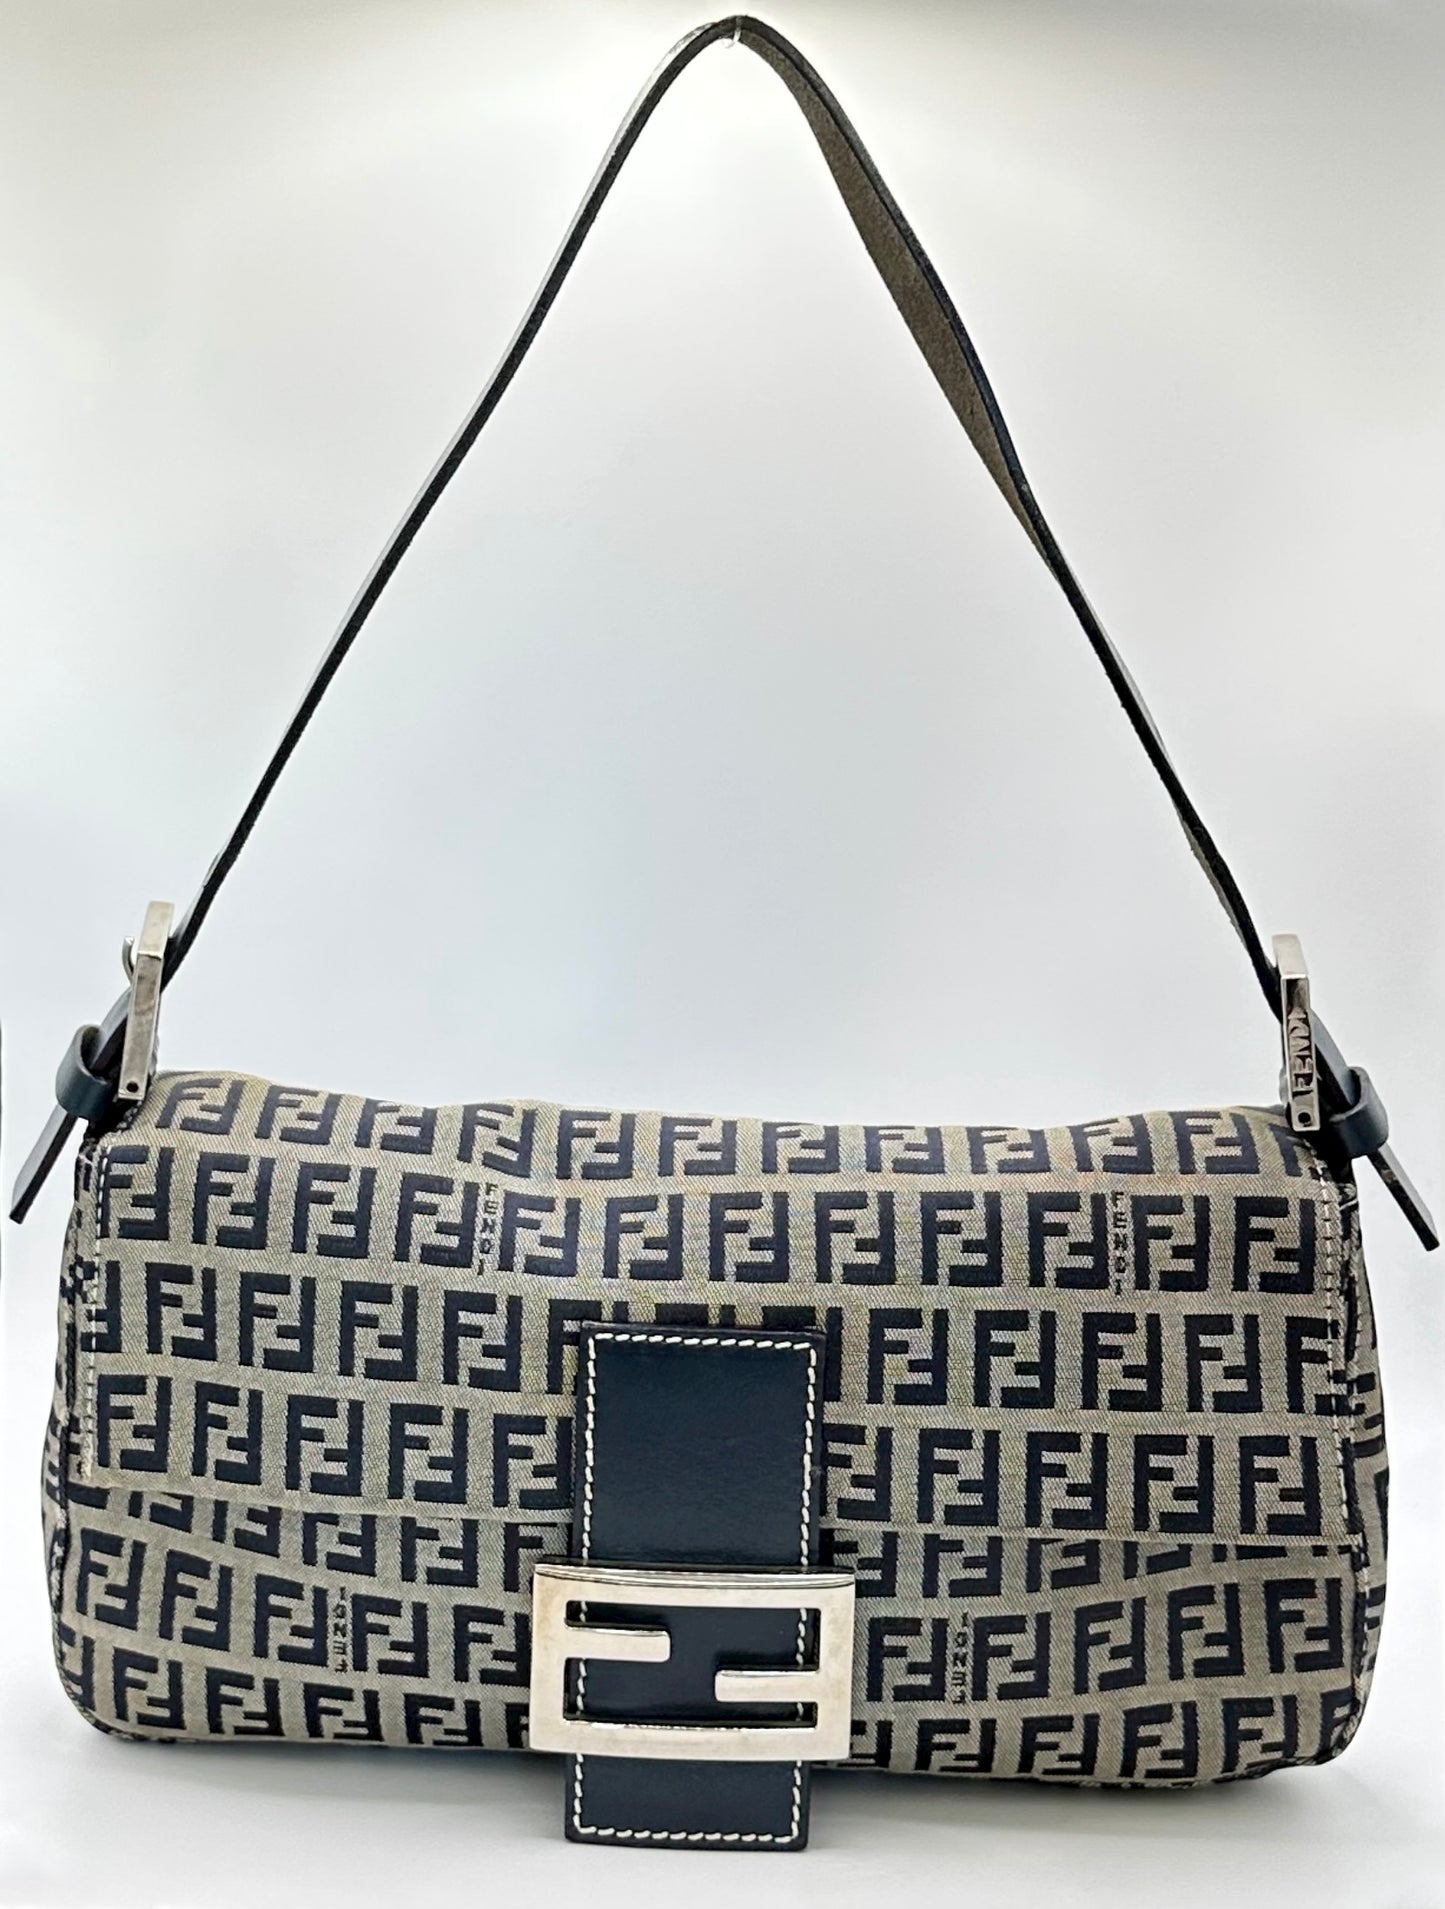 Vintage fendi baguette in navy colour with silver hardware front photo